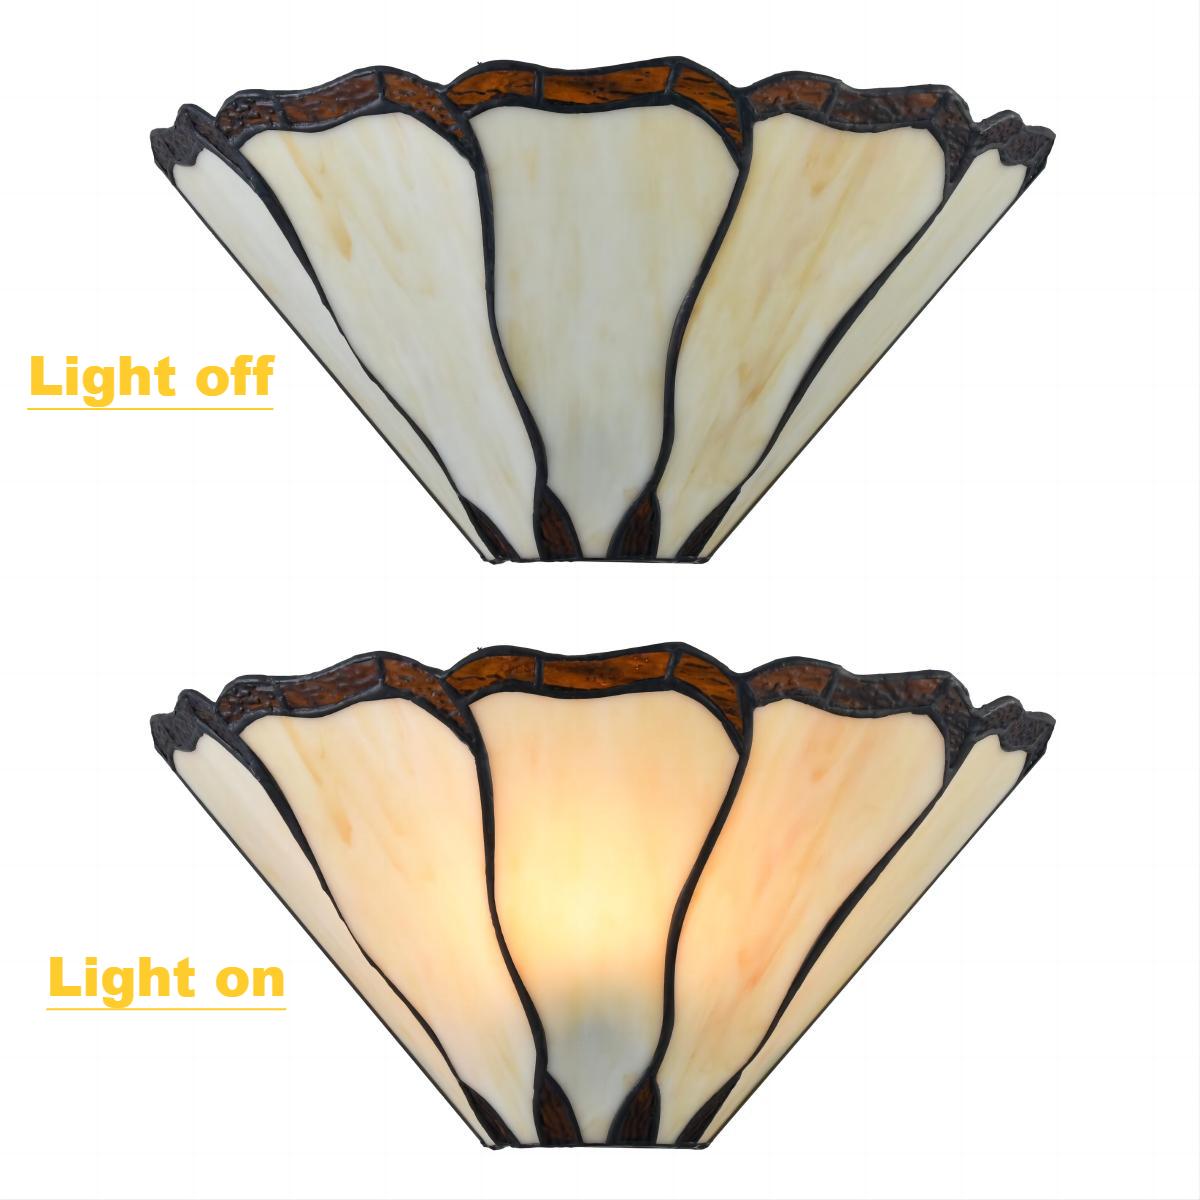 Tiffany Wall Sconces Stained Glass Antique Vintage Mission Style Wall Lighting or Living Room Bedroom Corridor Hallway Home Decor